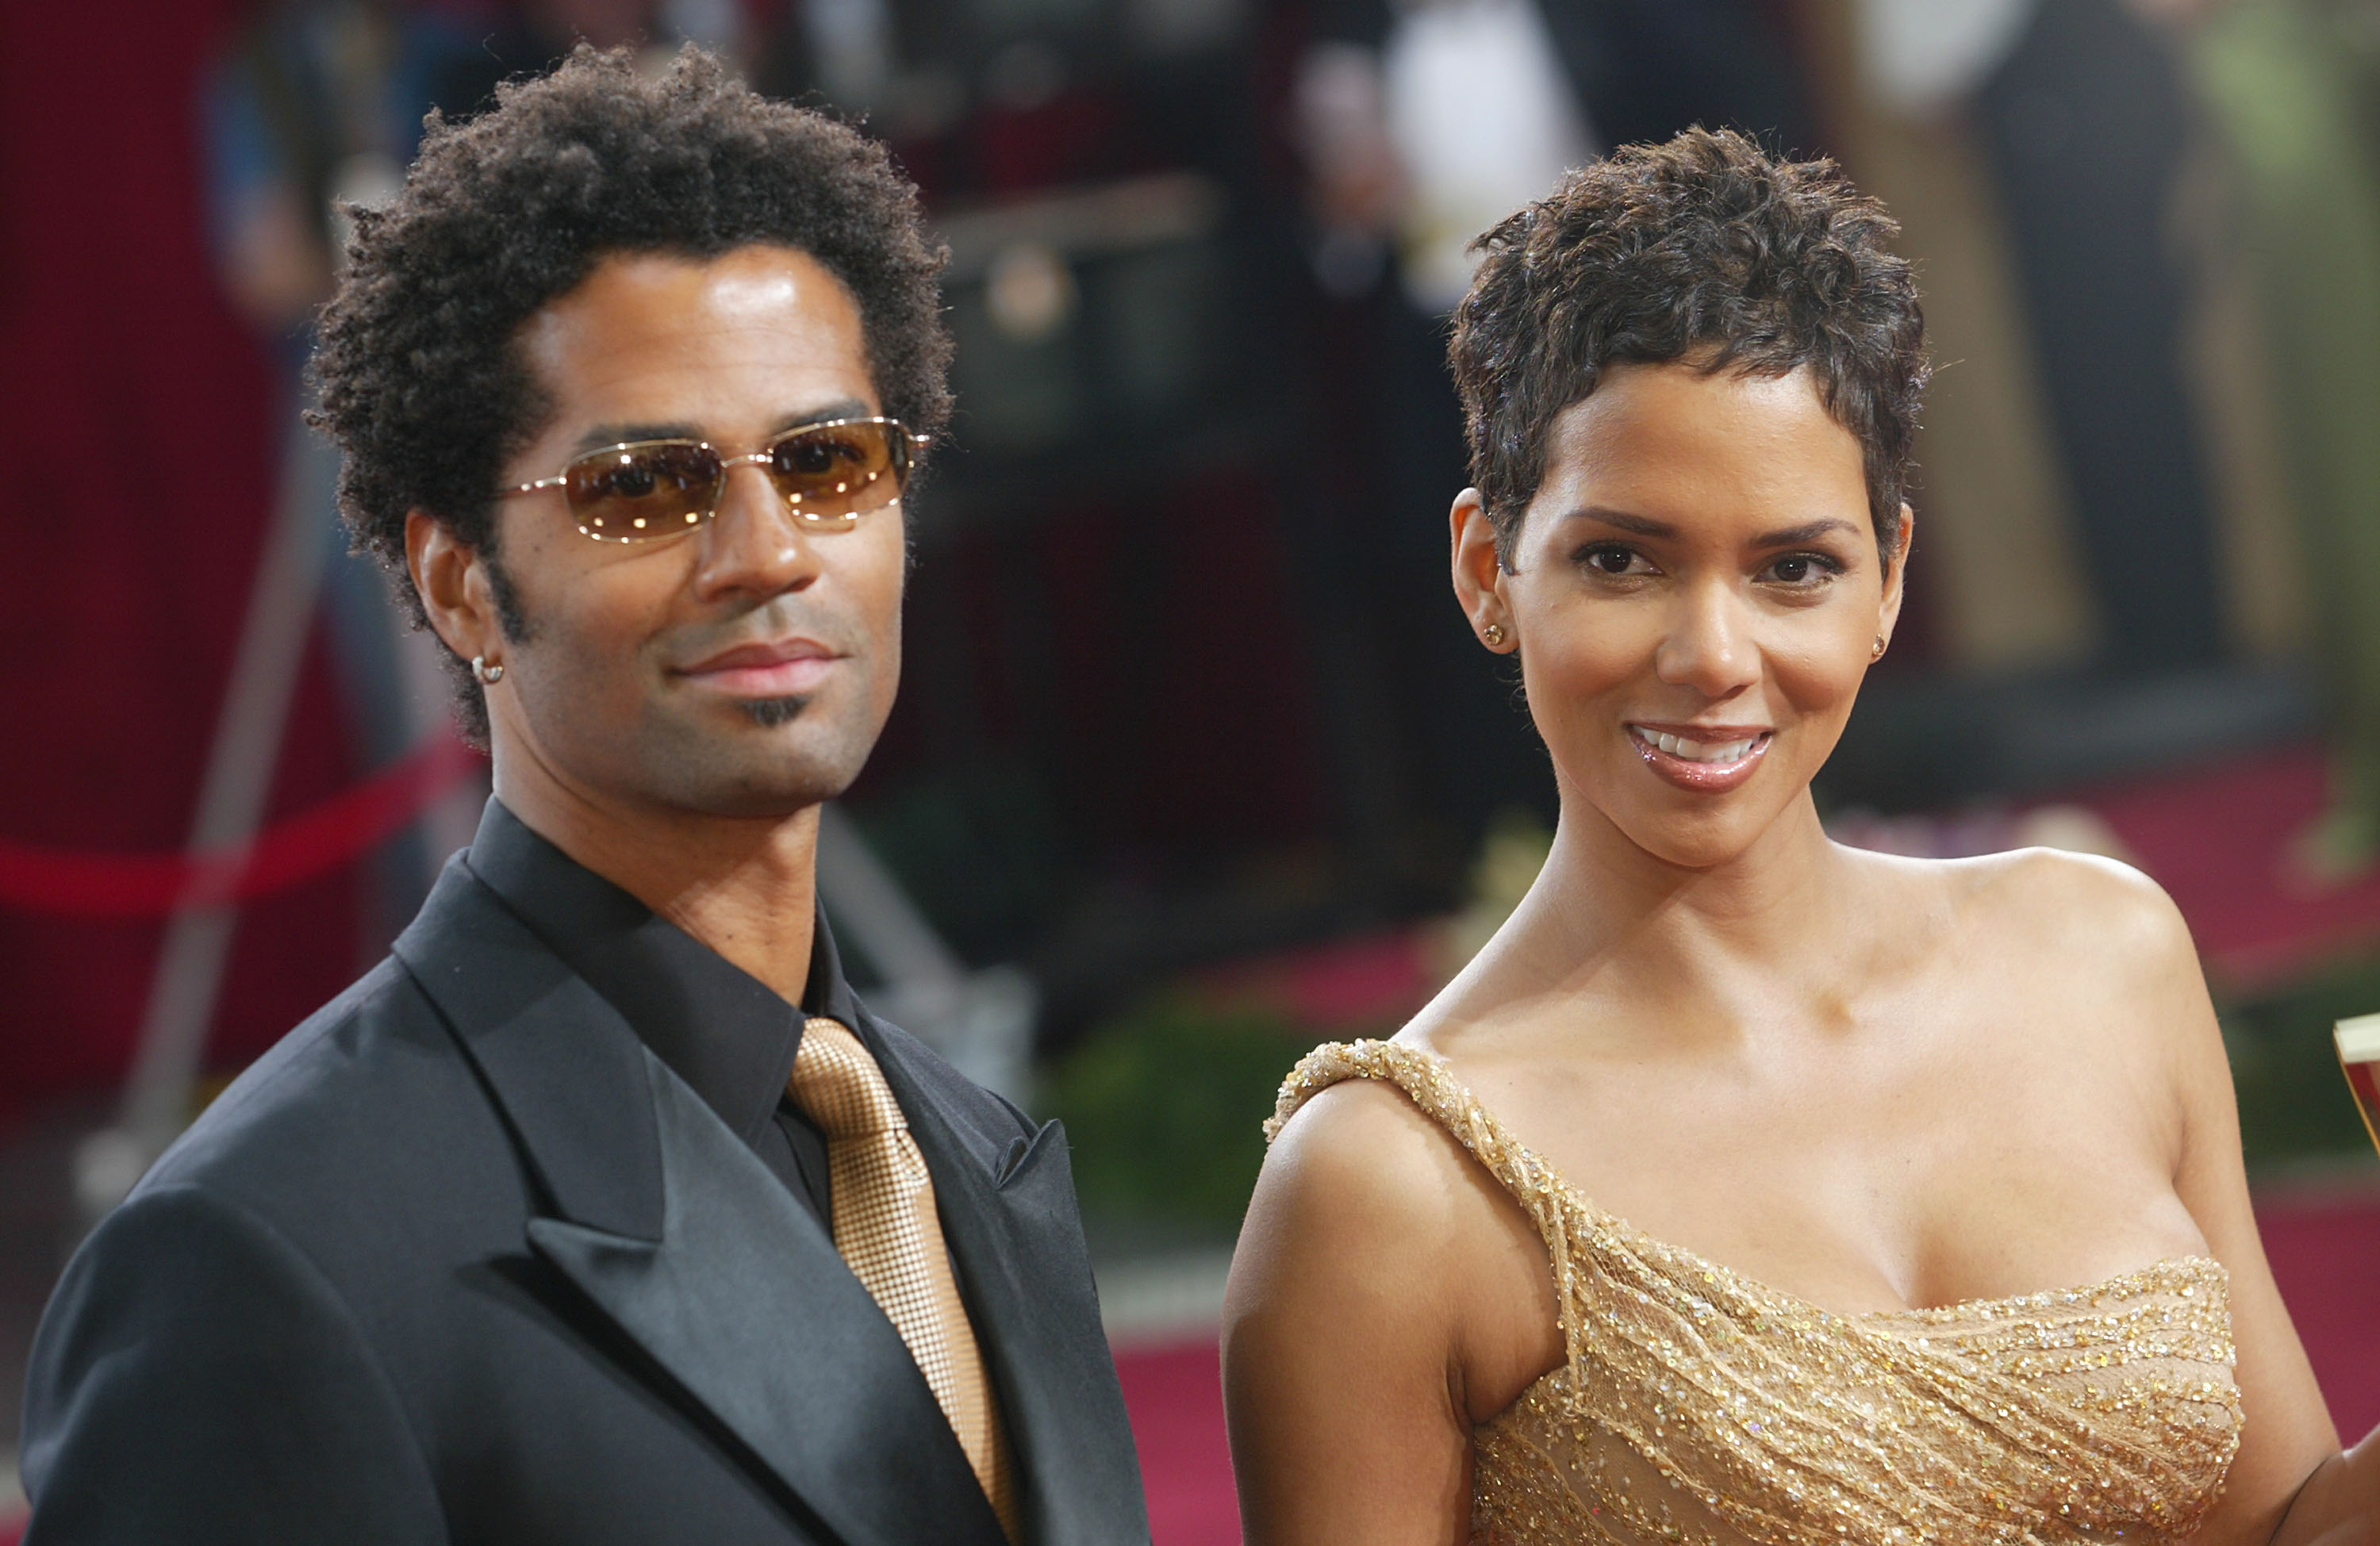 Eric benet cheating on halle berry